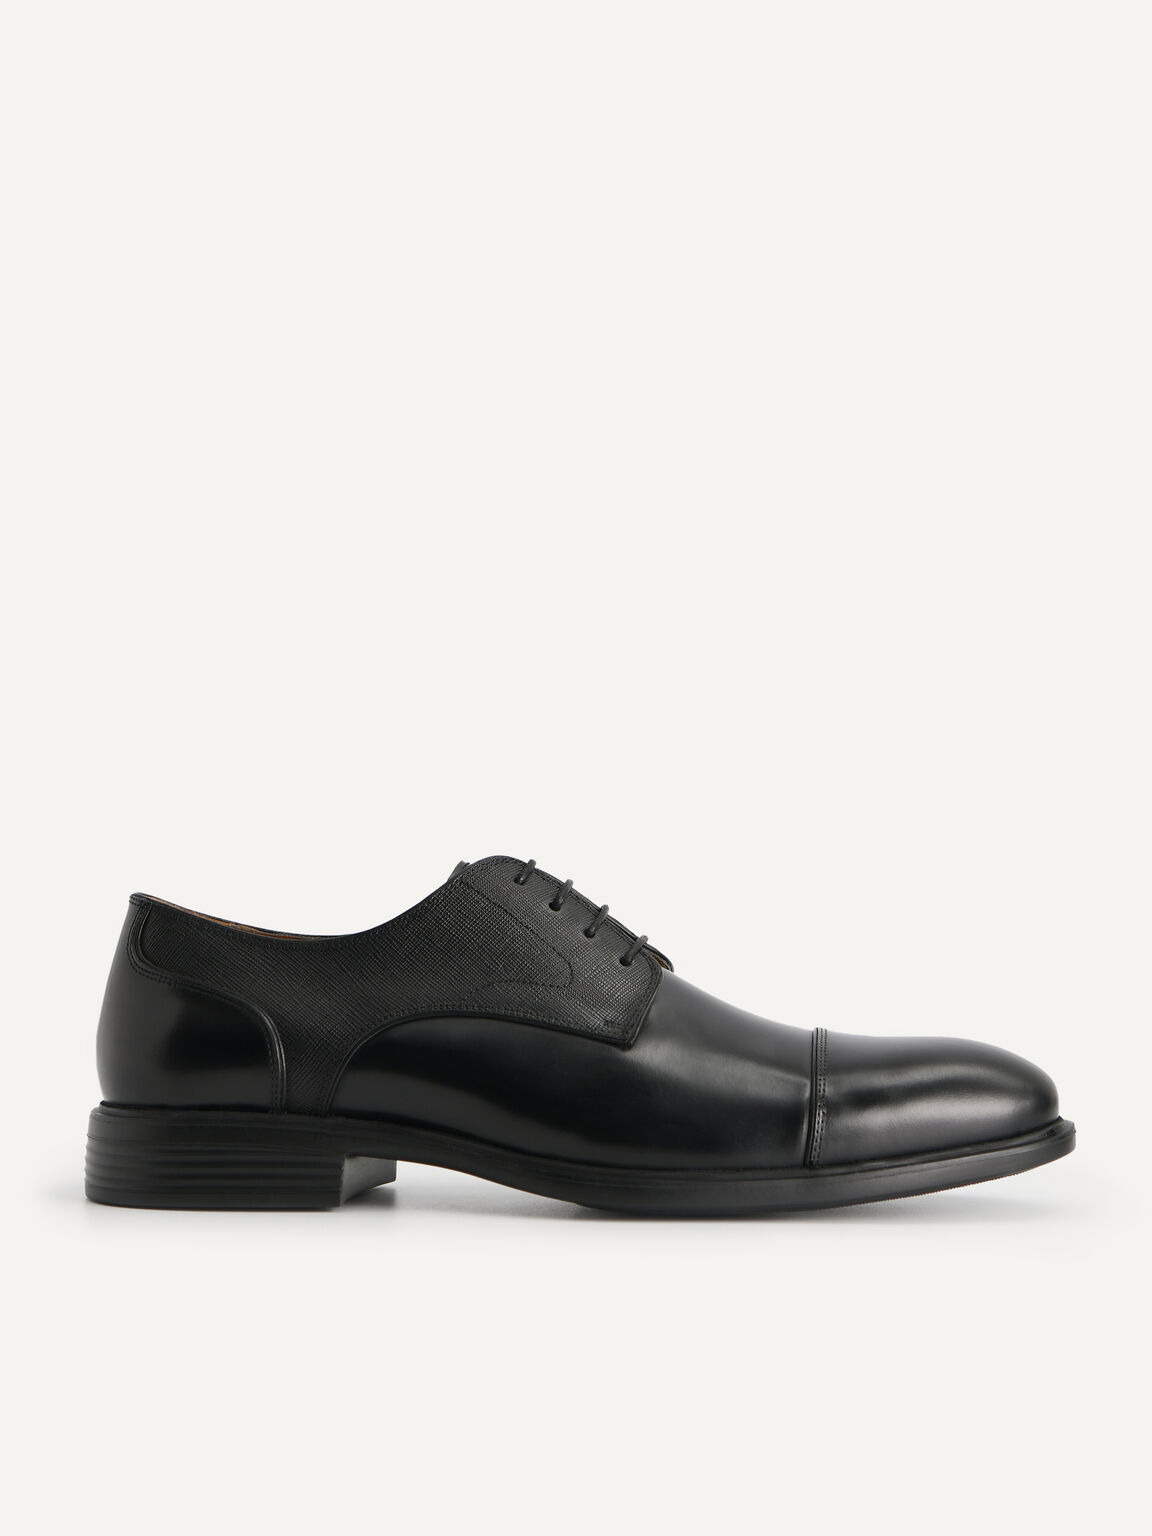 Altitude Lightweight Textured Leather Derby Shoes, Black